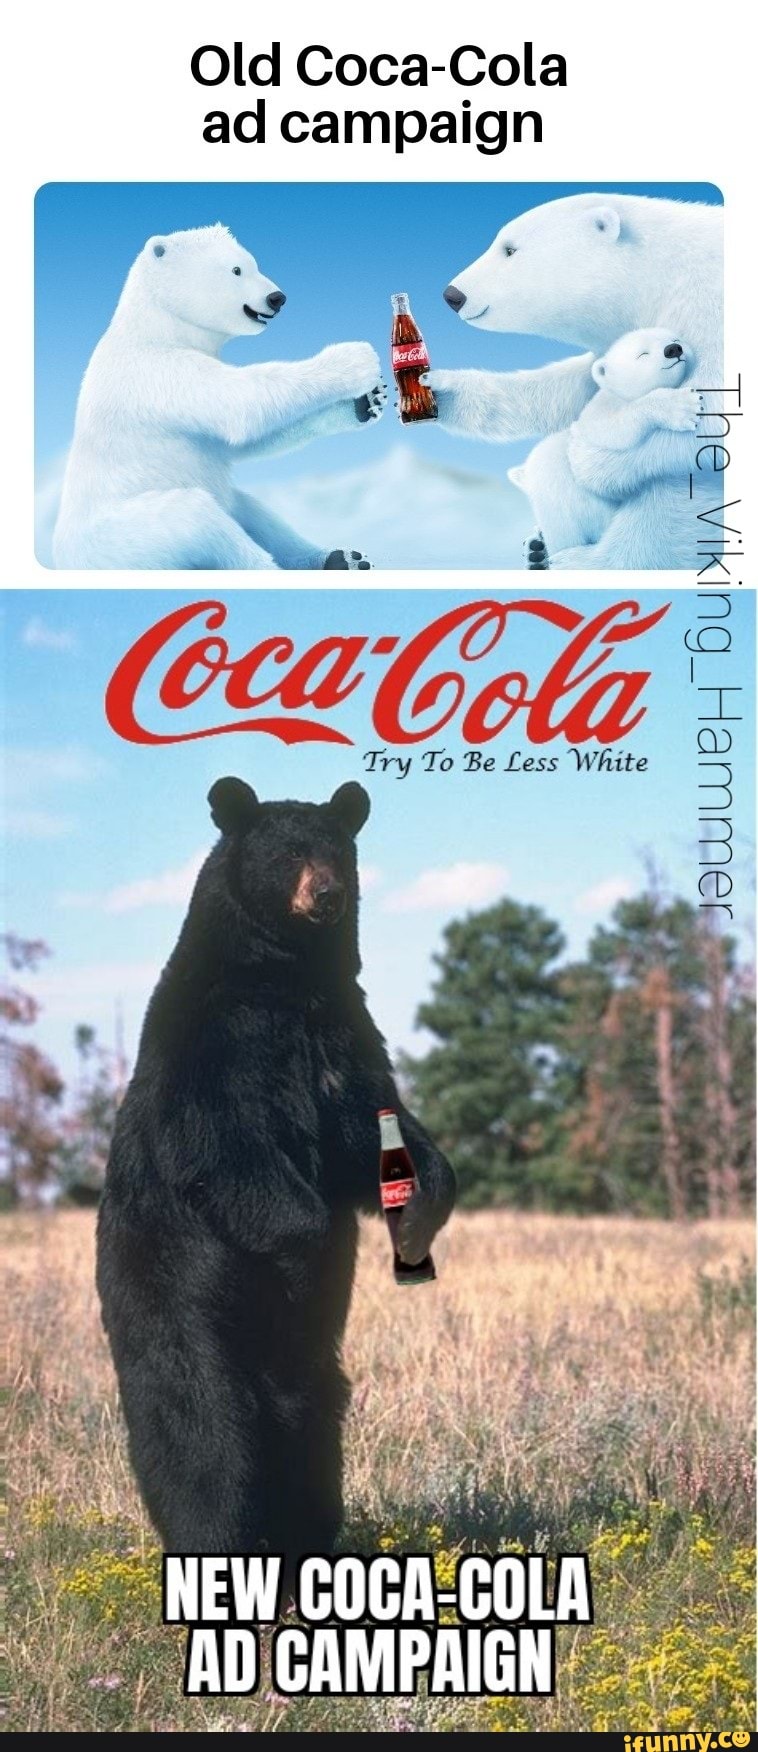 Old Coca Cola Ad Campaign Wt Try To Be Less White New Coca Cola Ad Campaign Ifunny